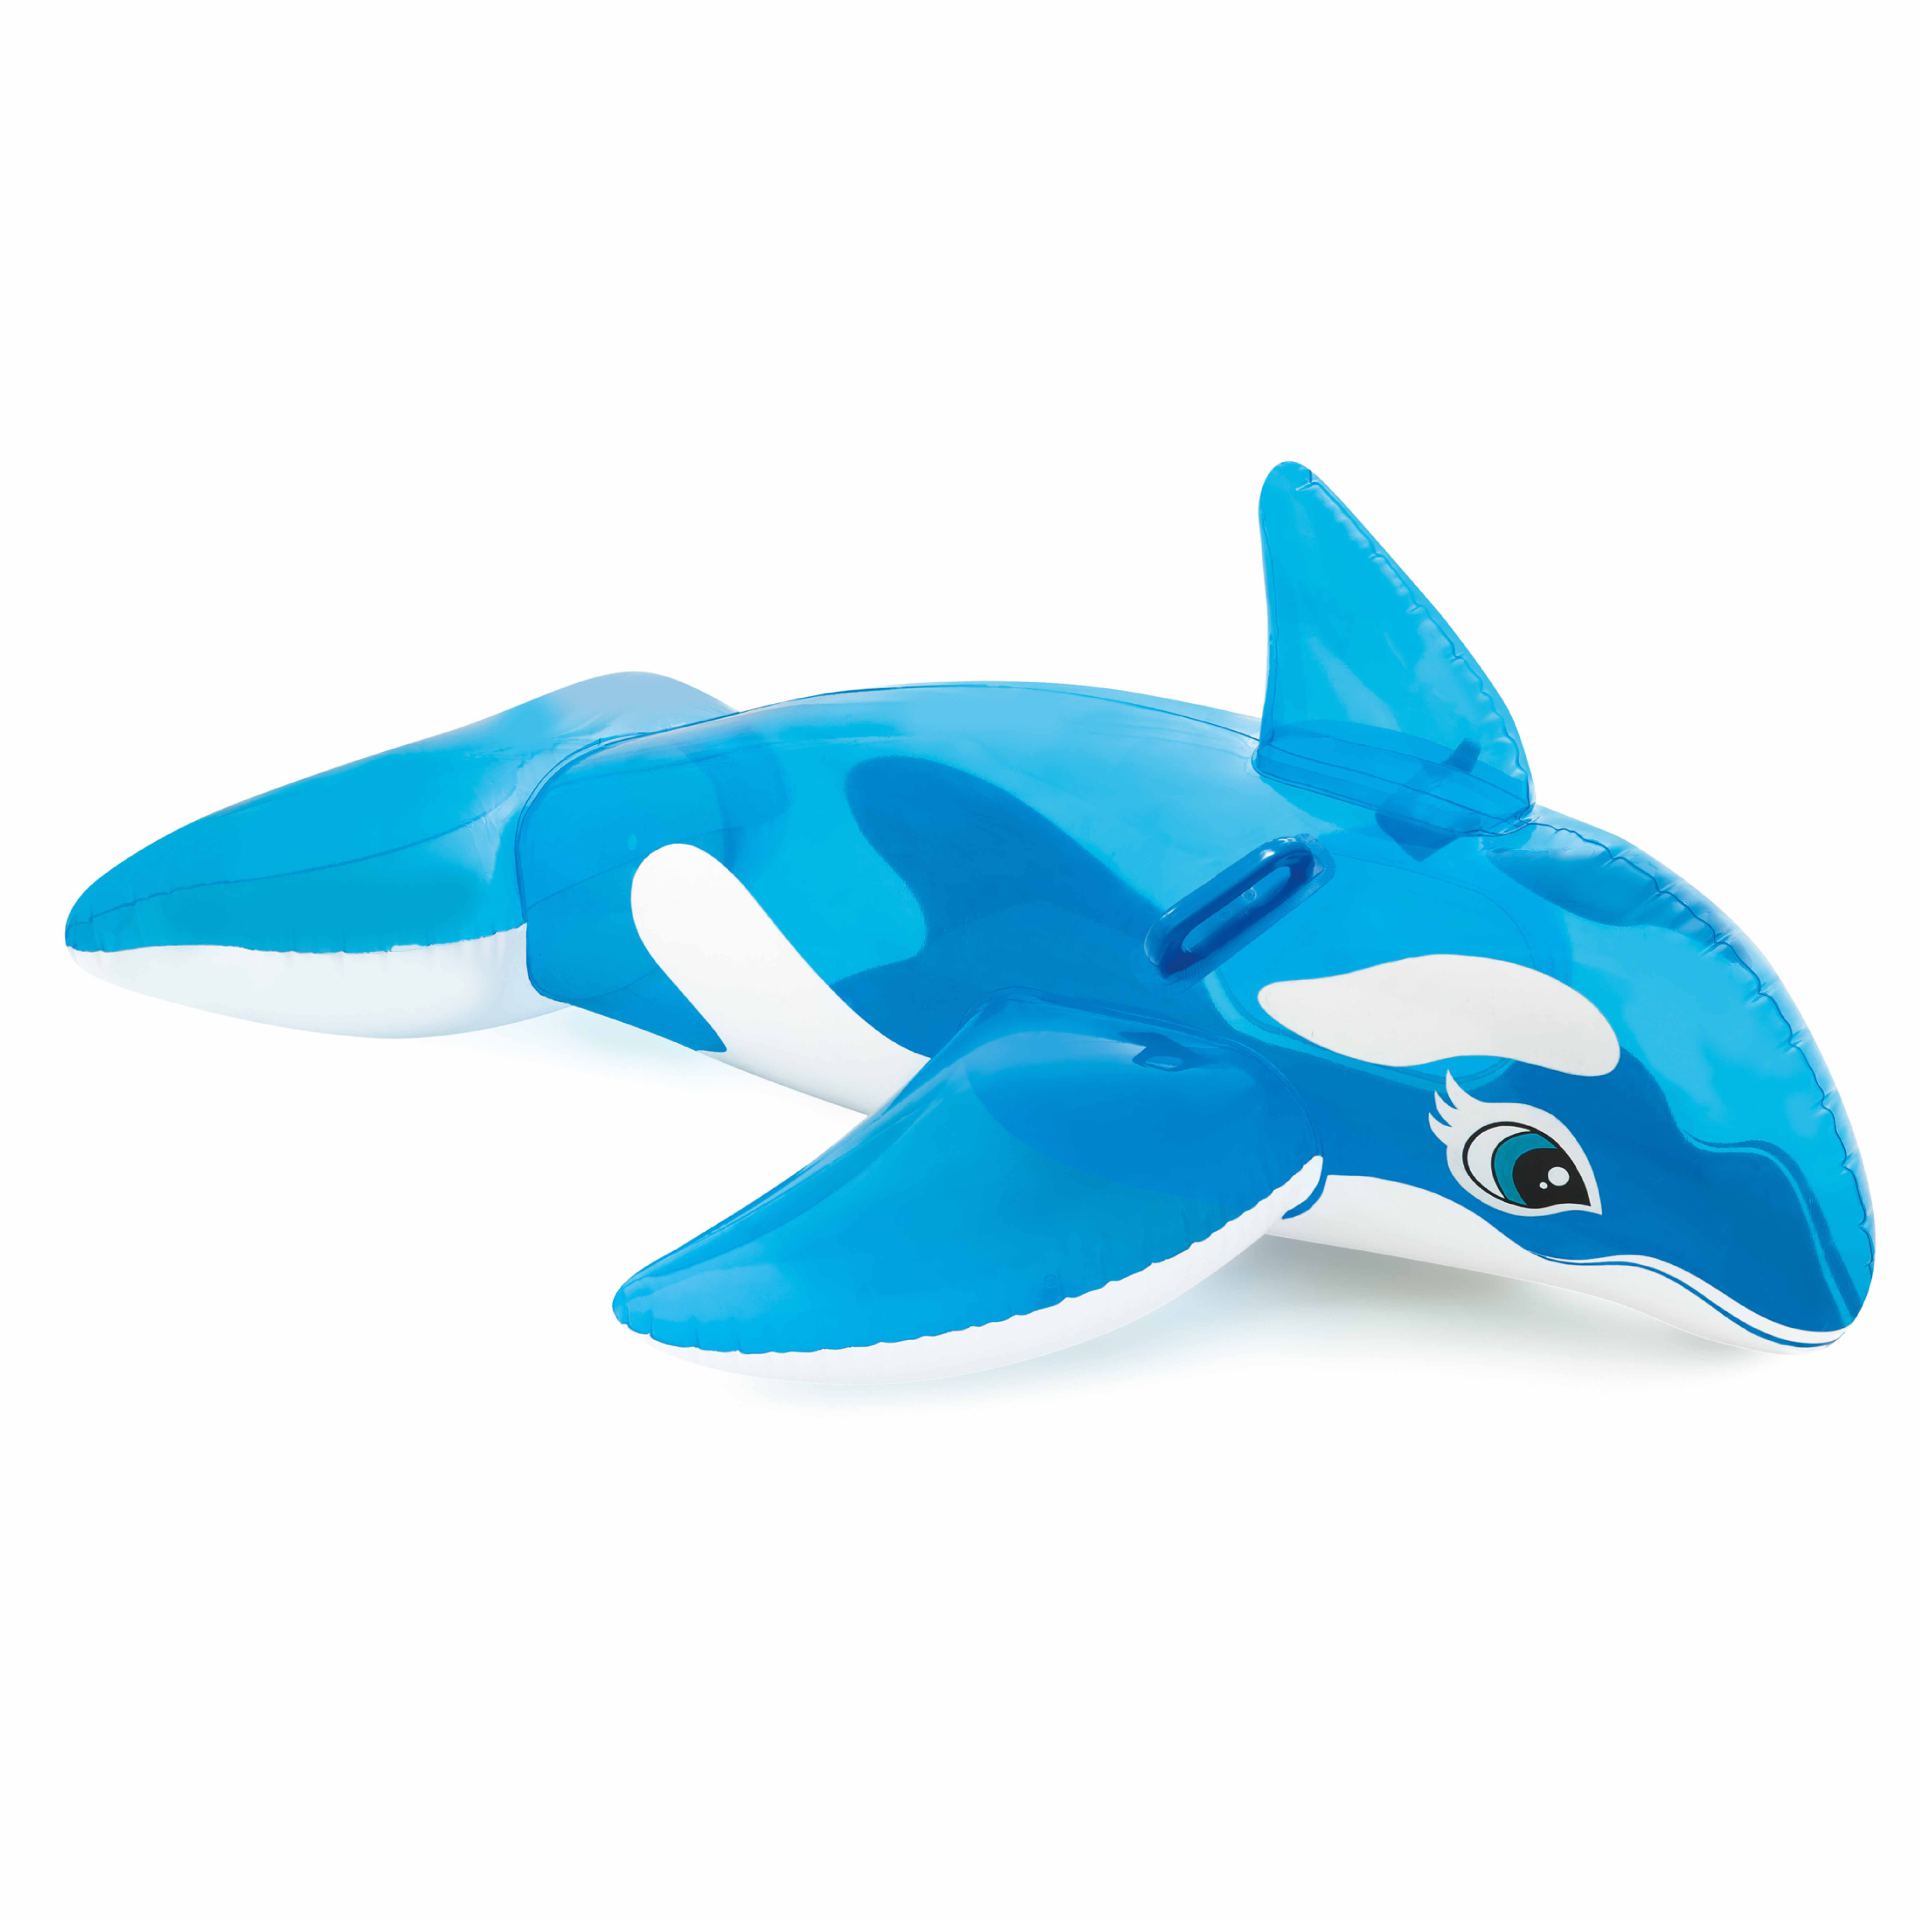 Intex lil' whale ride-on